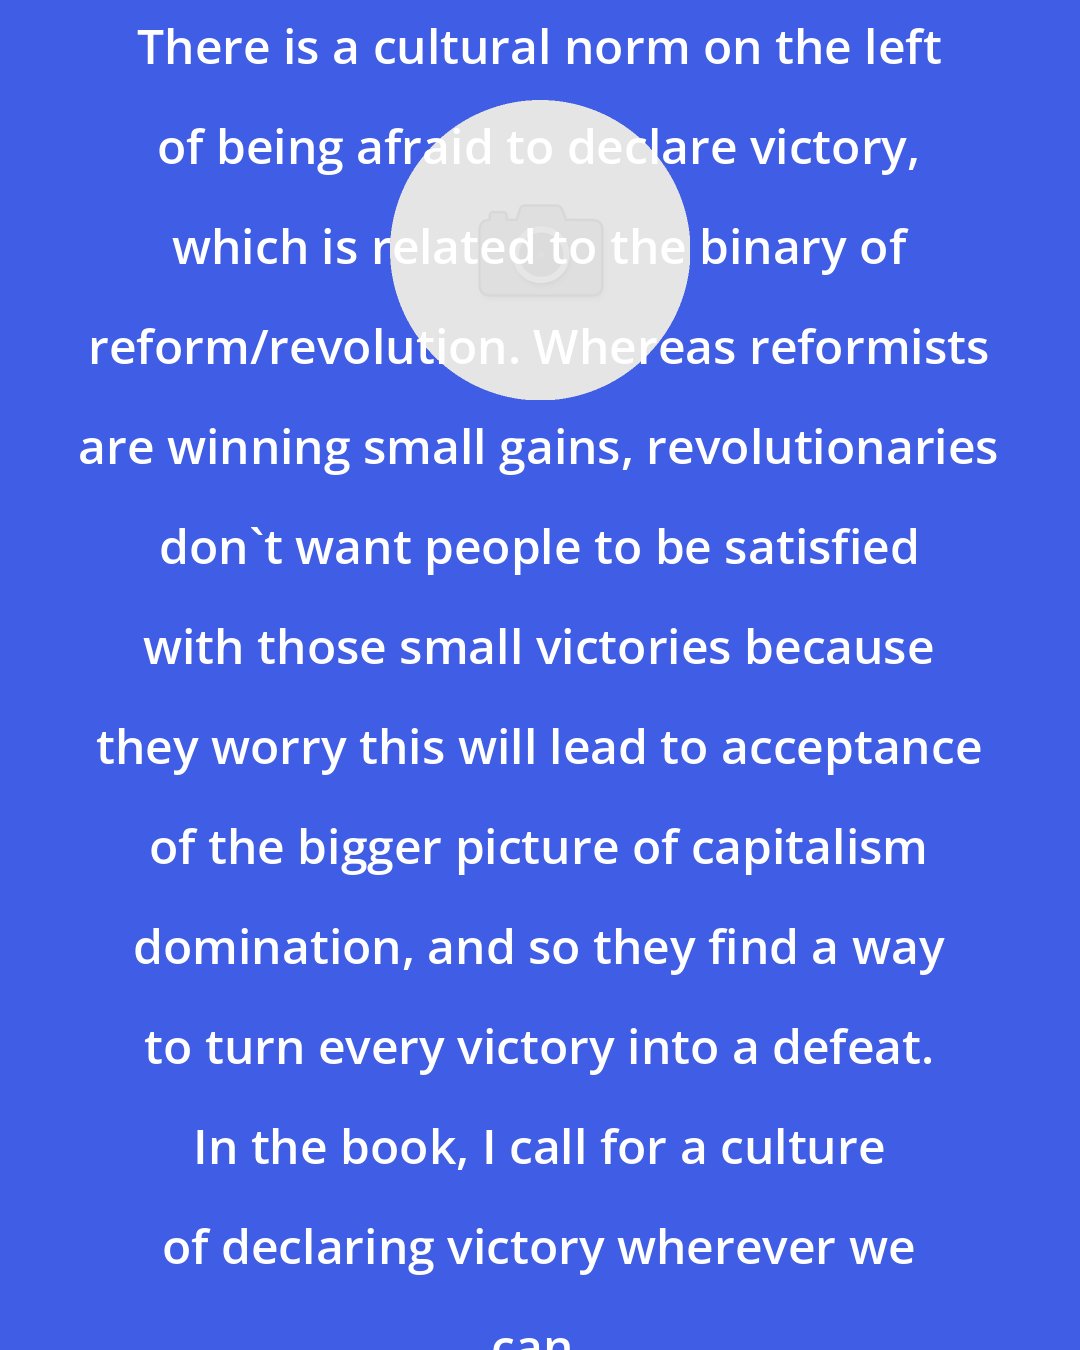 Cynthia Kauffman: There is a cultural norm on the left of being afraid to declare victory, which is related to the binary of reform/revolution. Whereas reformists are winning small gains, revolutionaries don't want people to be satisfied with those small victories because they worry this will lead to acceptance of the bigger picture of capitalism domination, and so they find a way to turn every victory into a defeat. In the book, I call for a culture of declaring victory wherever we can.